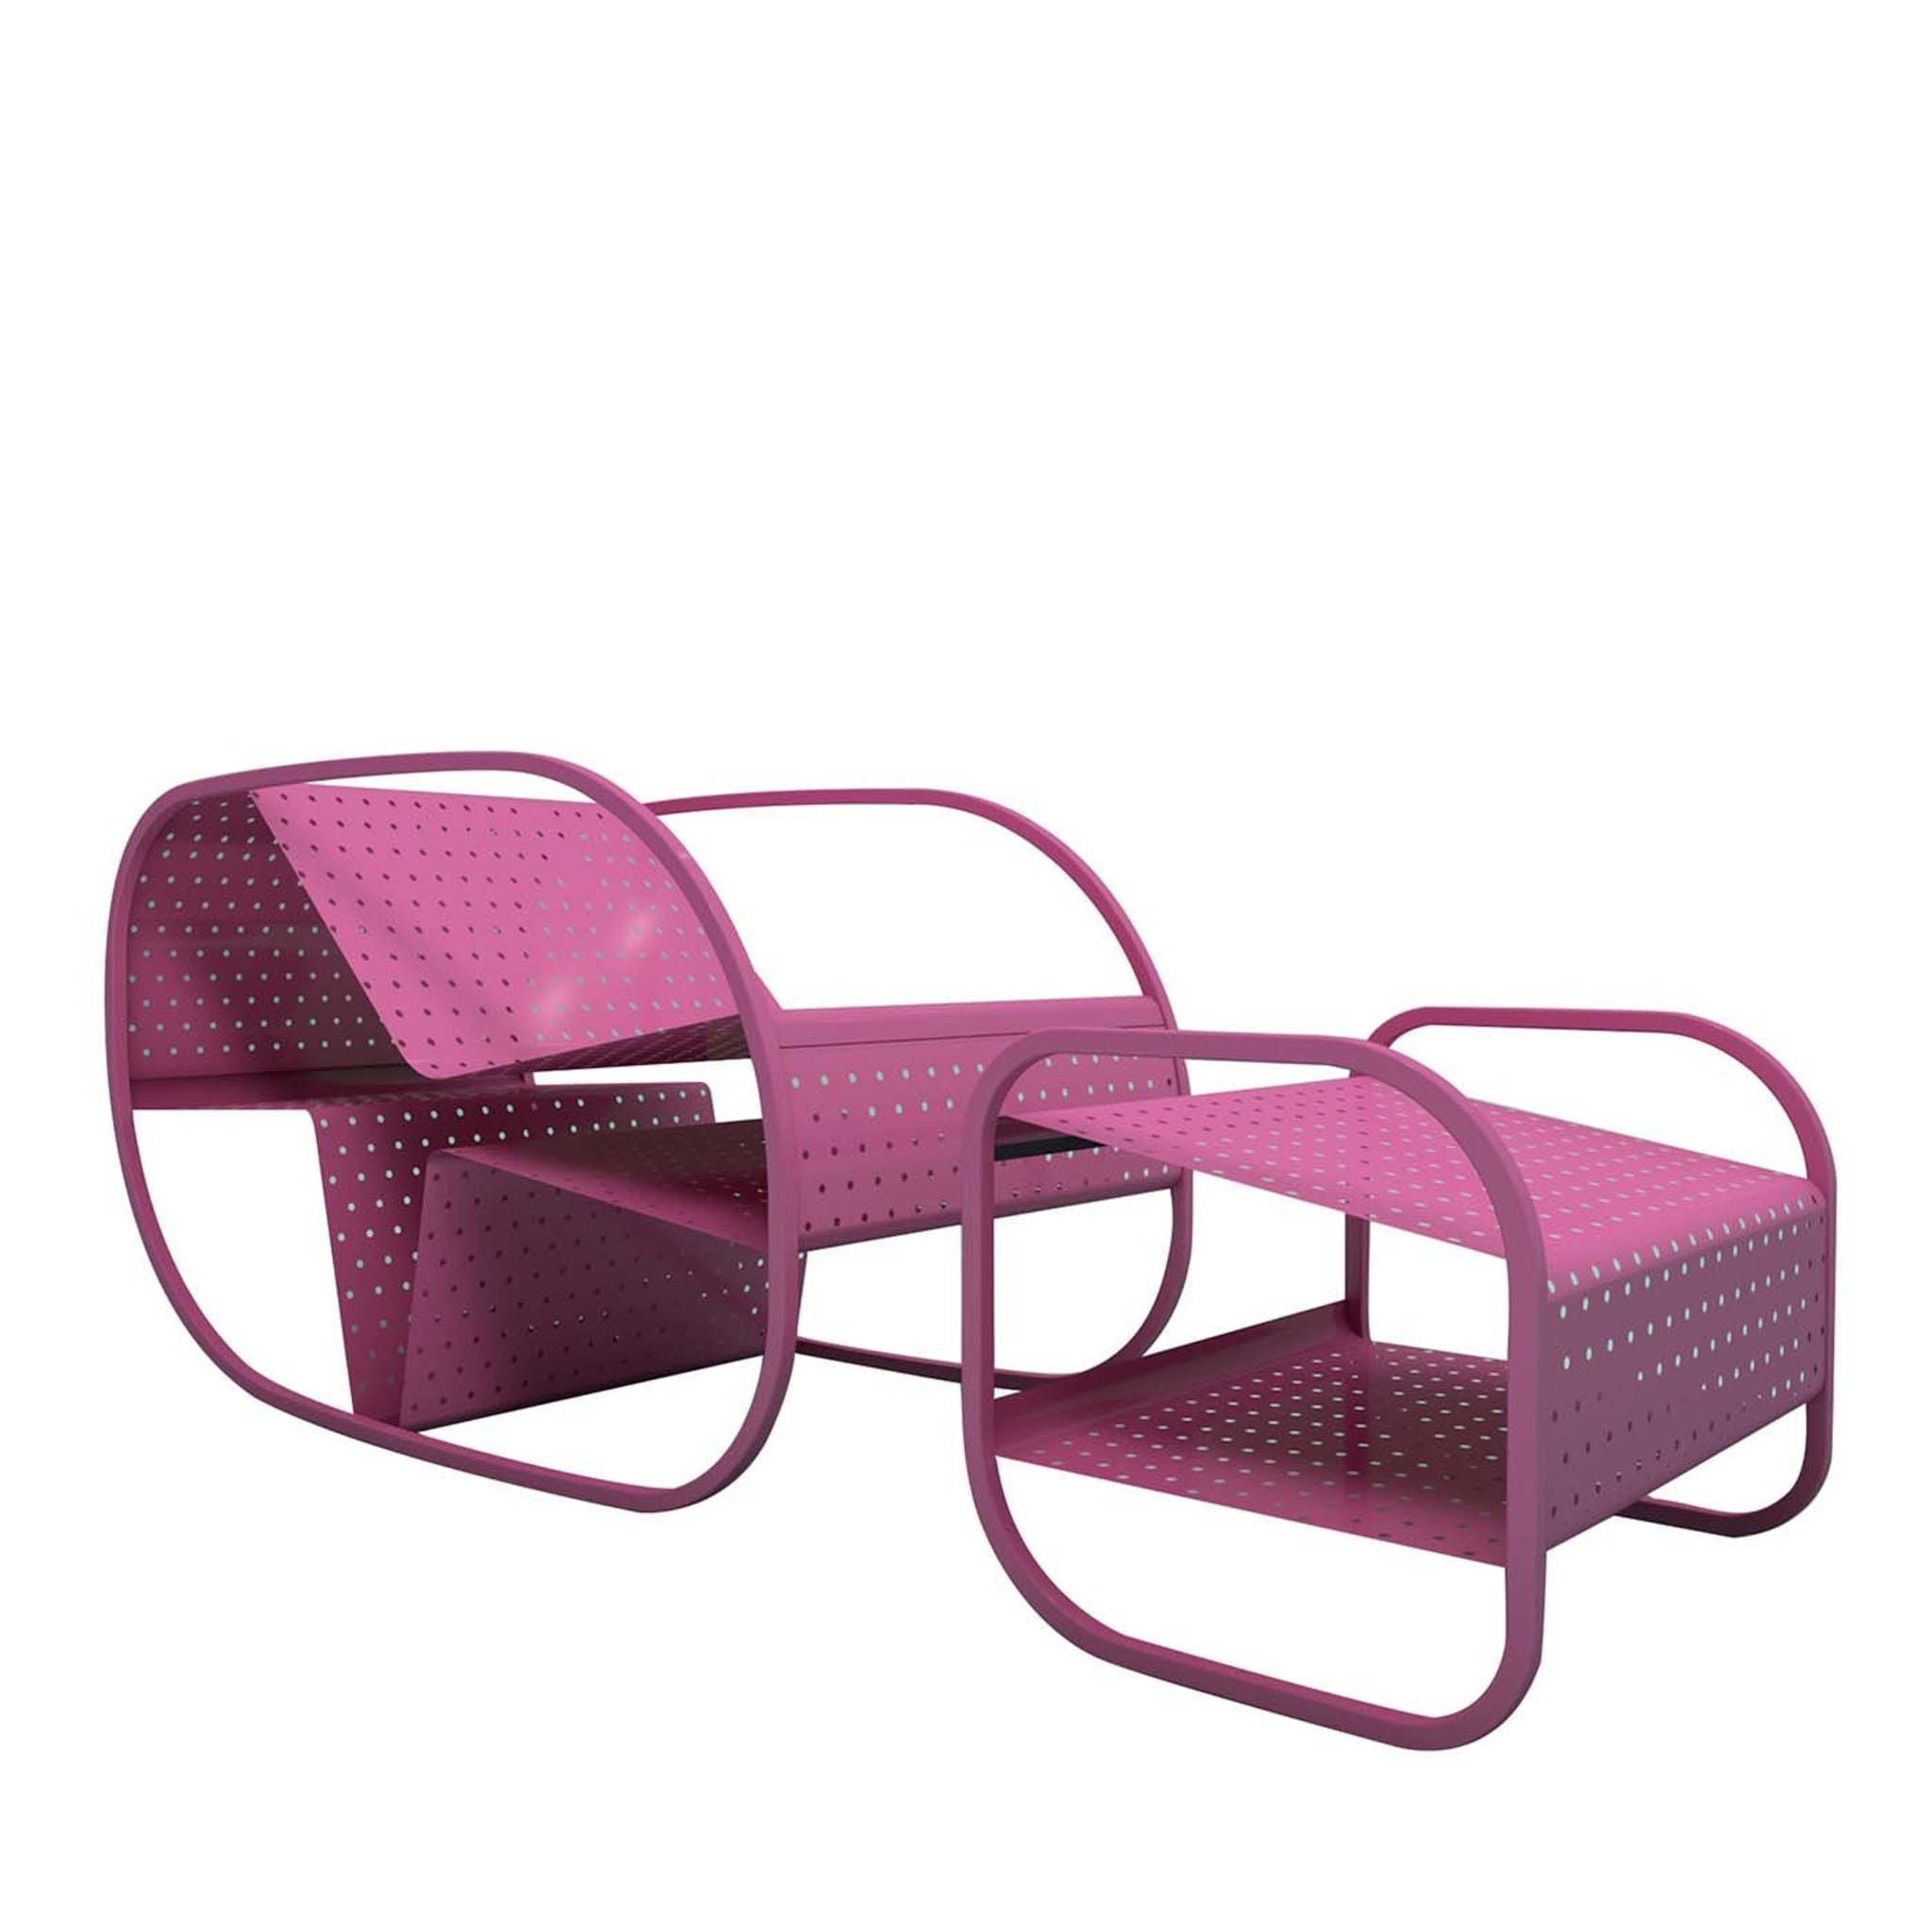 Flip Seat and sidetable Fuxia by Salomè Hazan - Main view